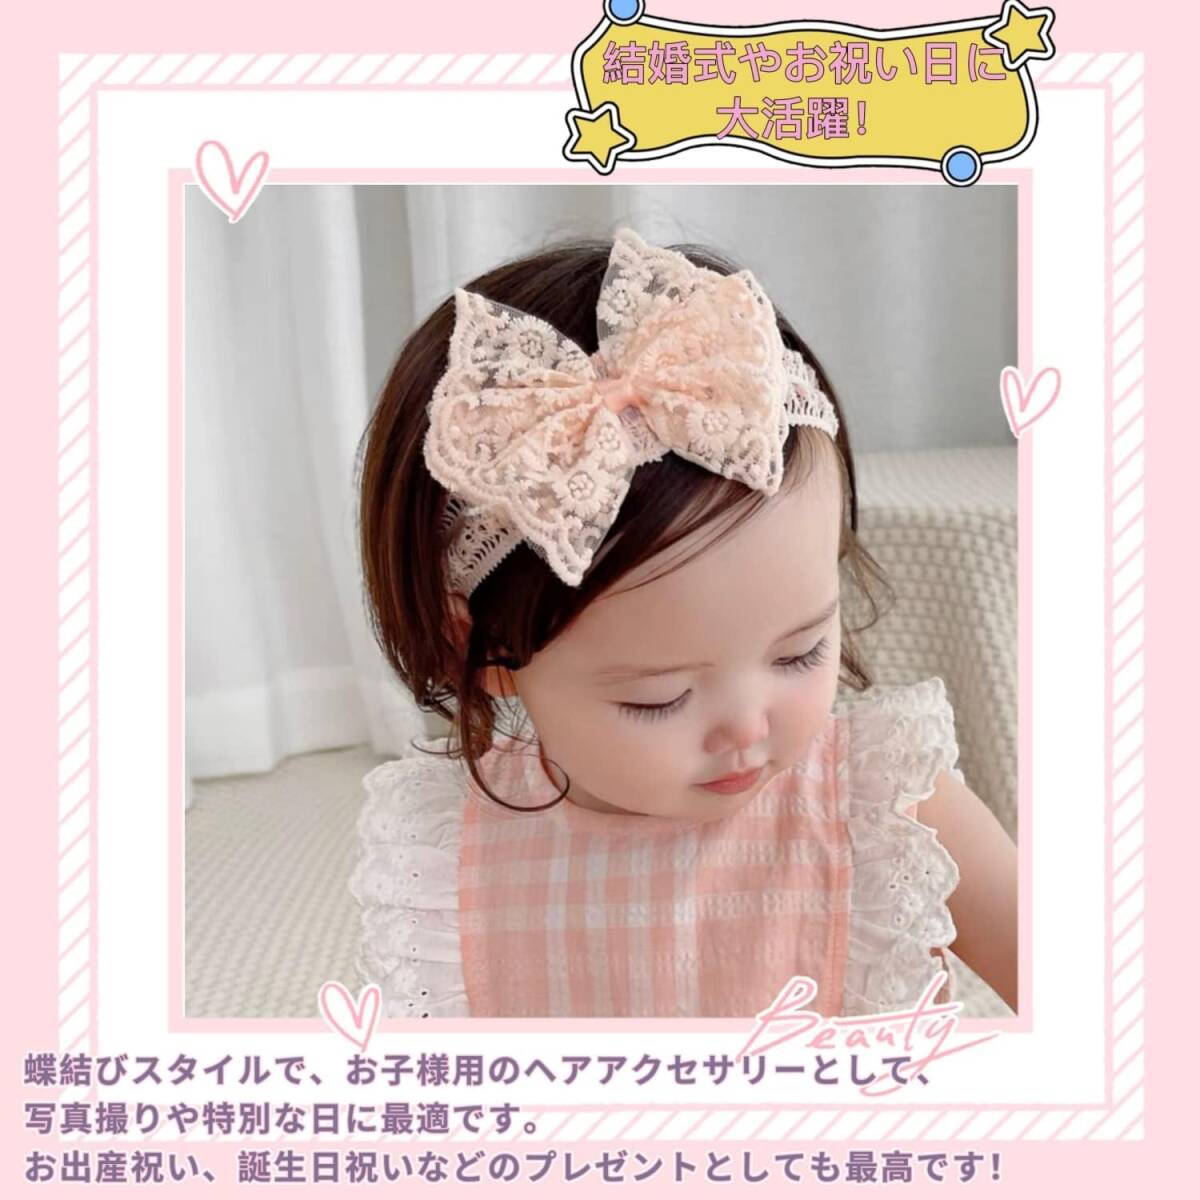  special price!! baby hair band hair accessory baby head dress hair ornament for children newborn baby girl celebration of a birth ( one piece set white )